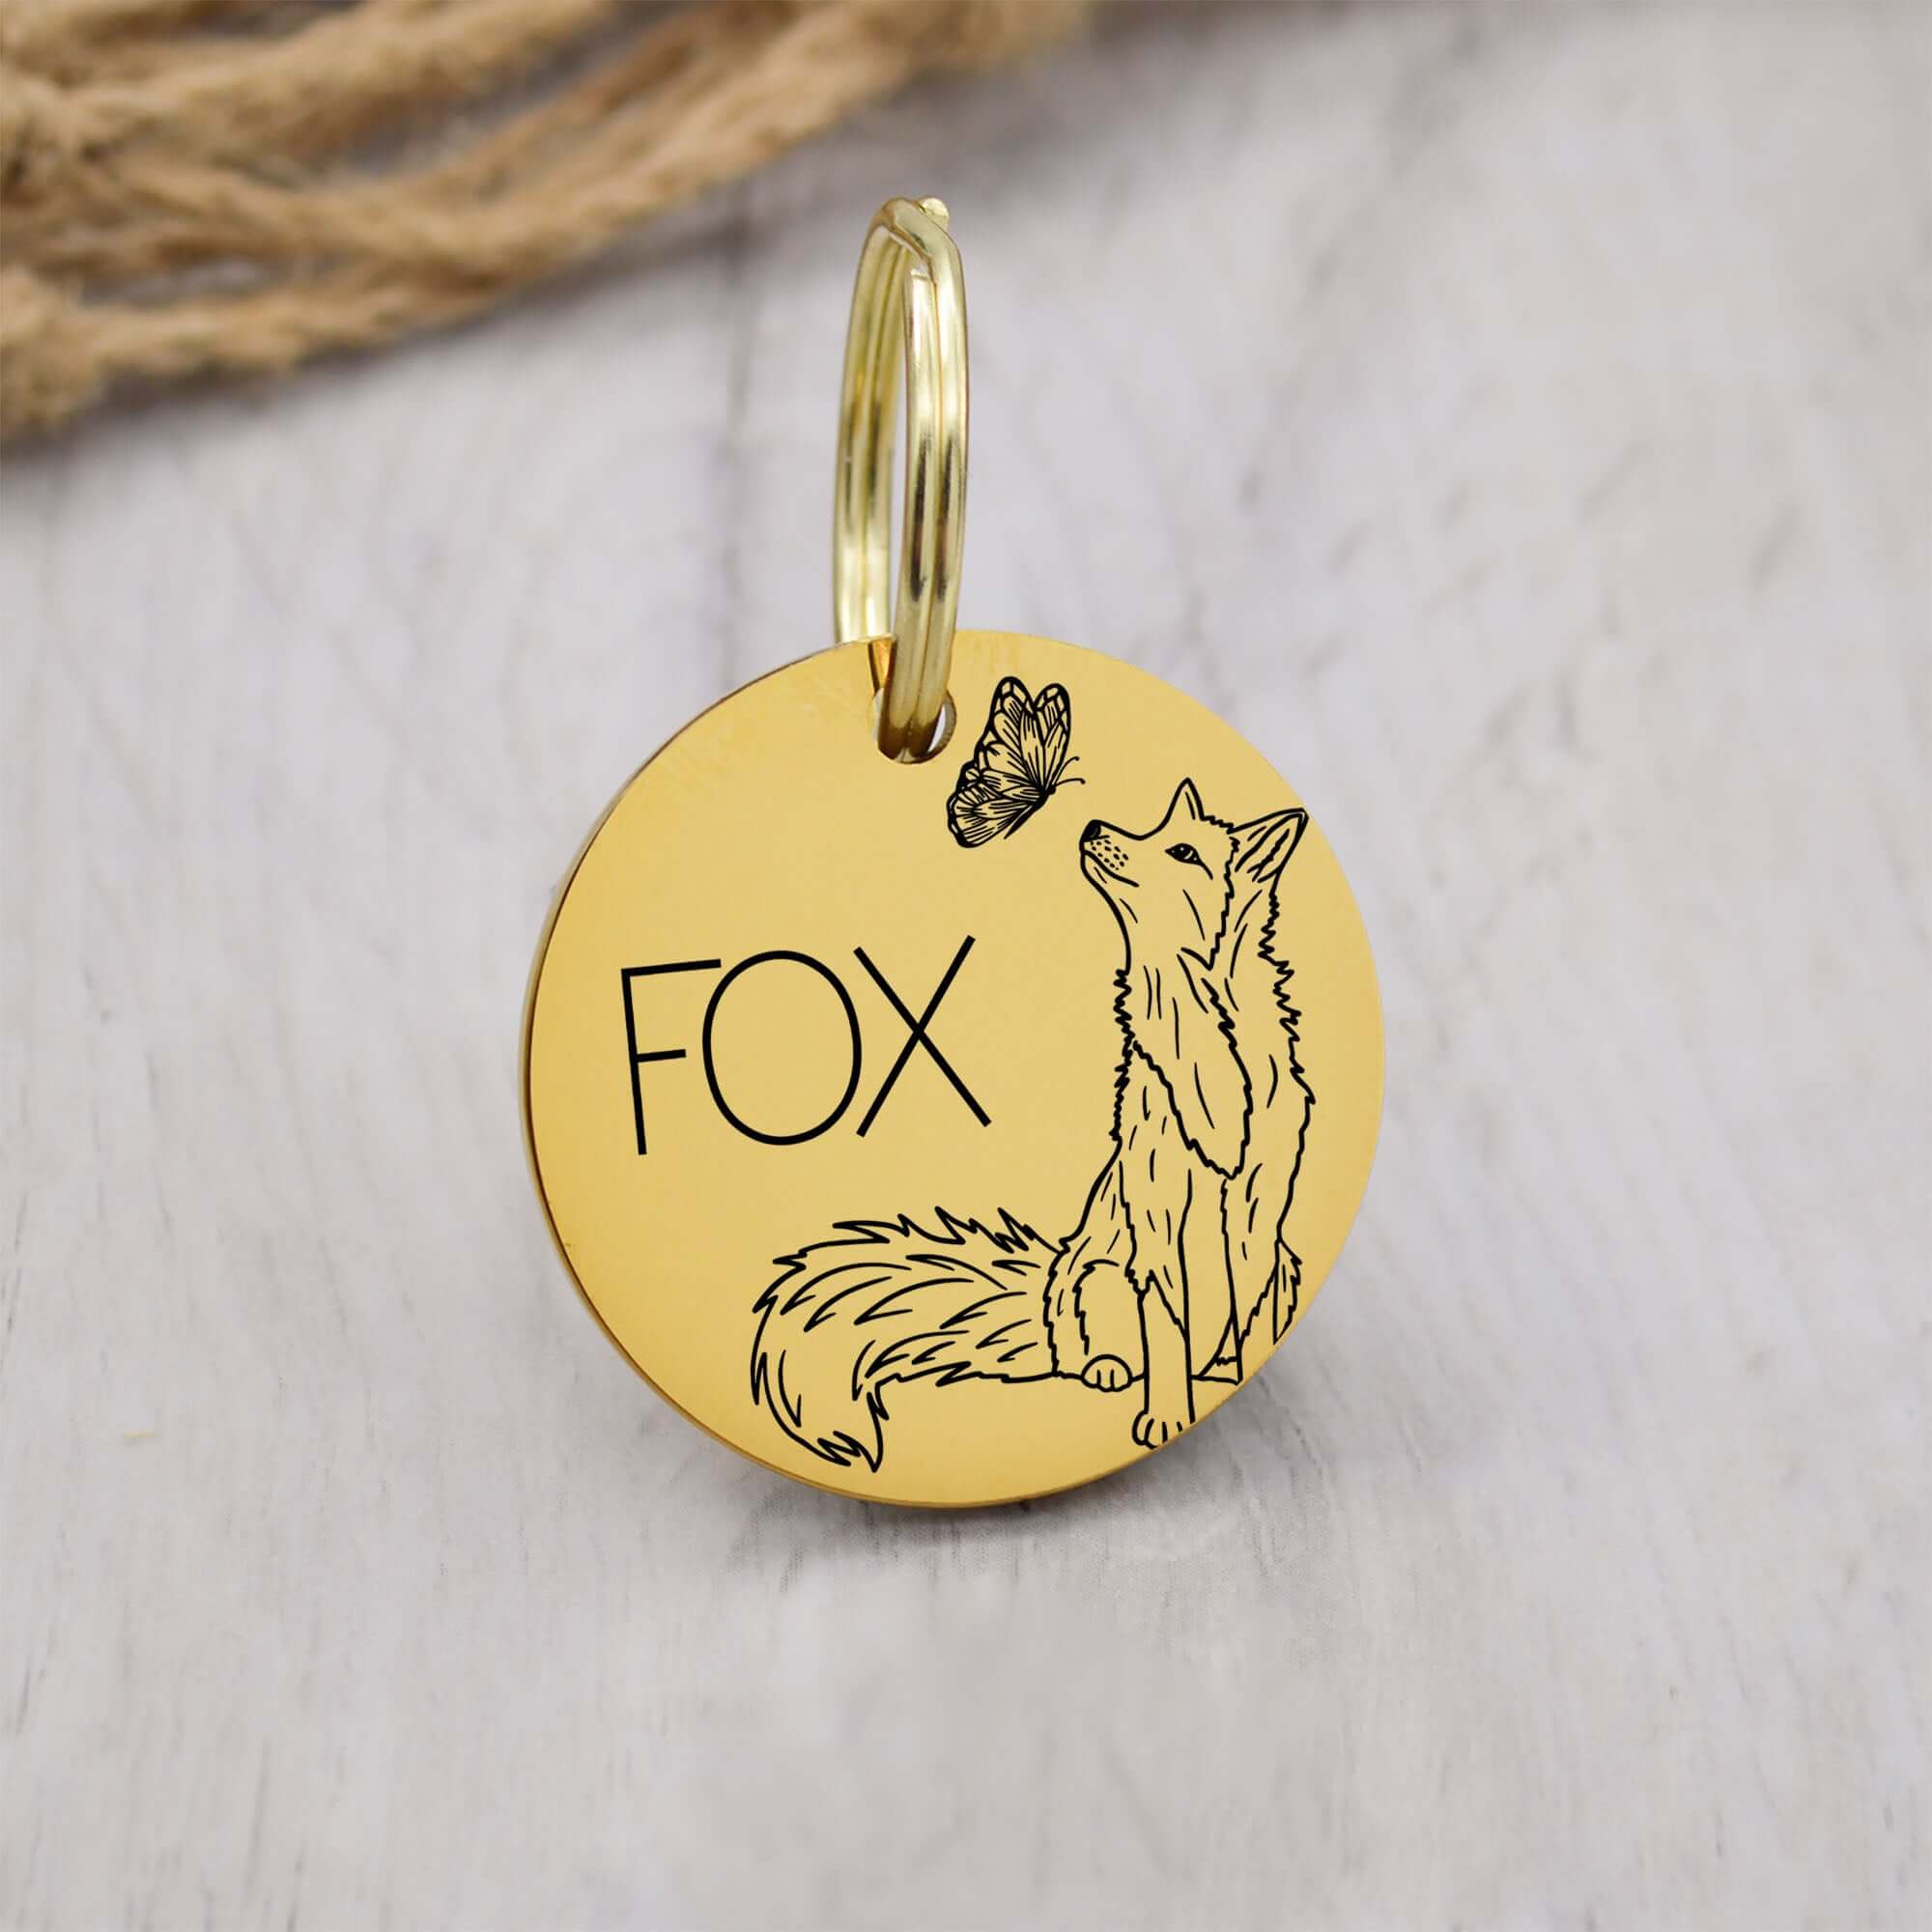 Customized dog tags | Tag4MyPet